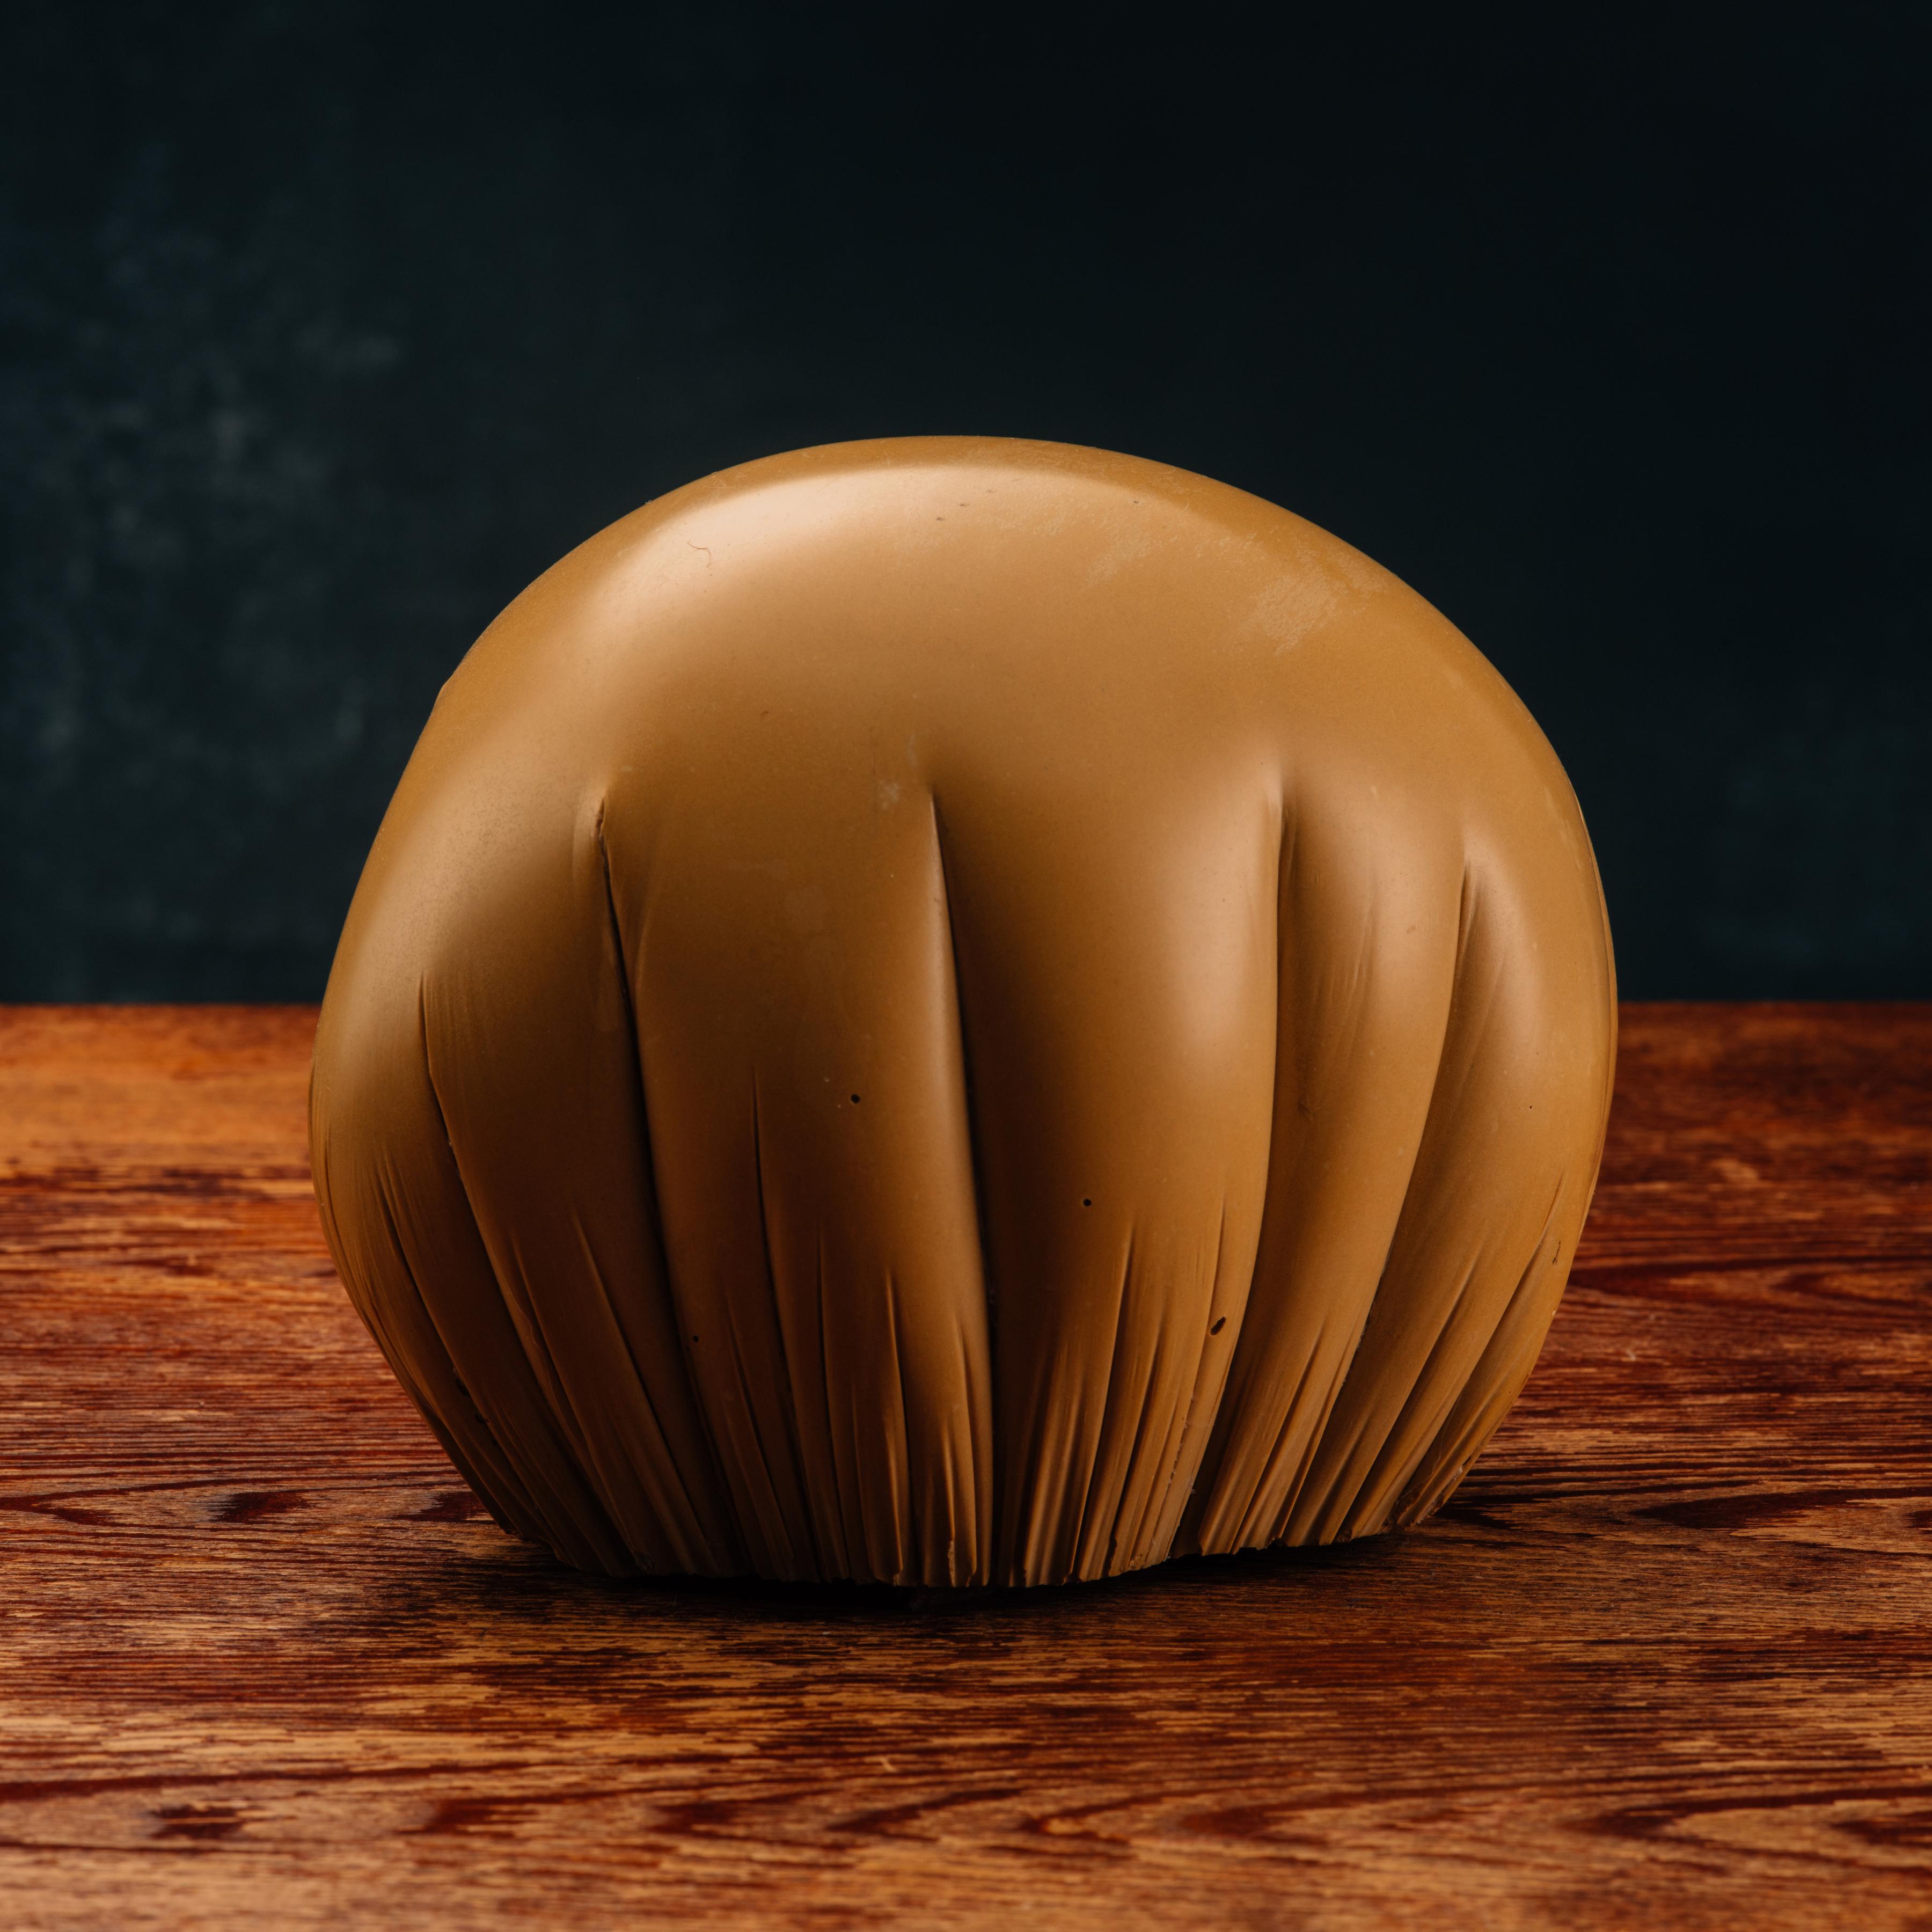 A highly effective trompe l’oeil tabletop sculpture formed in tinted and polished solid cast stone to resemble a leather pouf. Well-executed by an anonymous artist. European in origin, likely late 20th century.